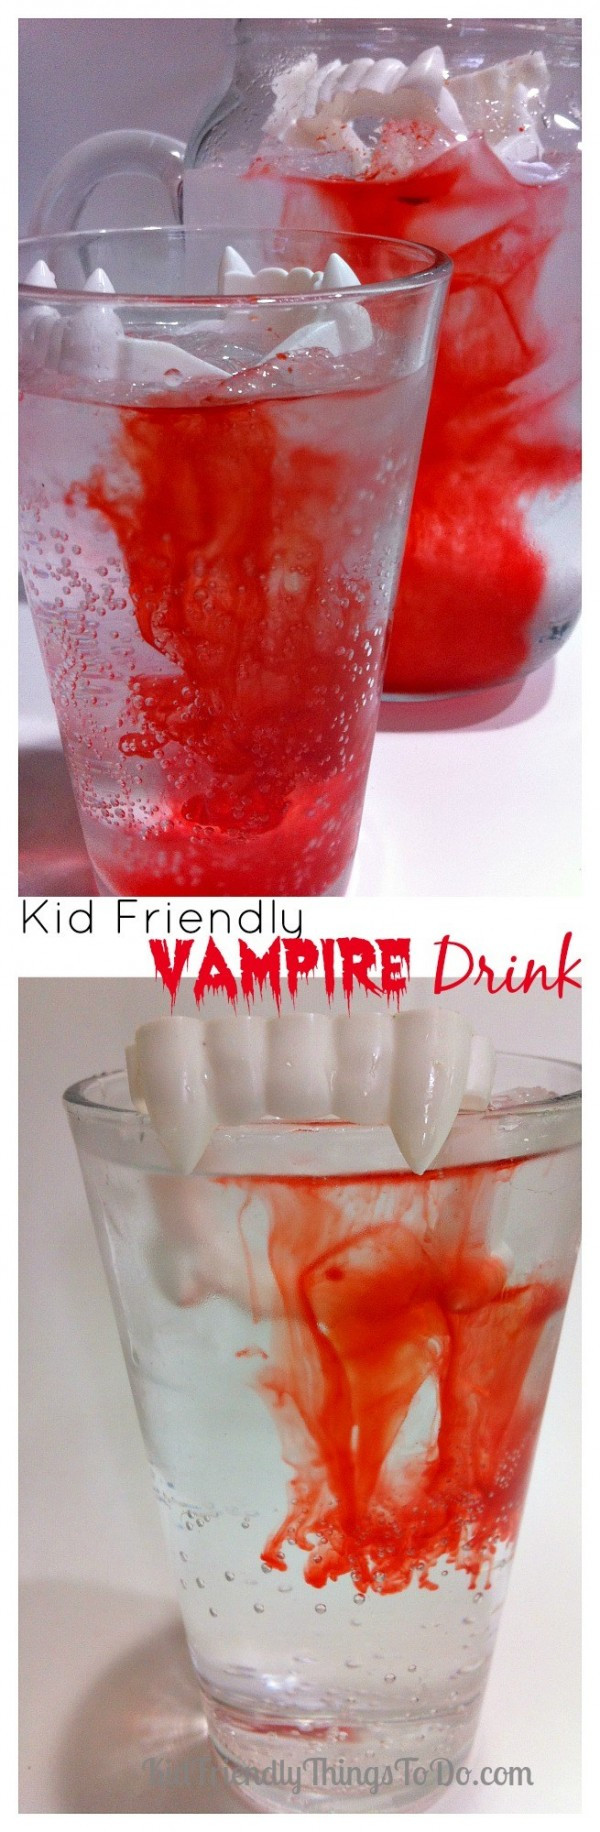 Halloween Party Drinks
 Halloween Drinks For The Kids – Party Ideas